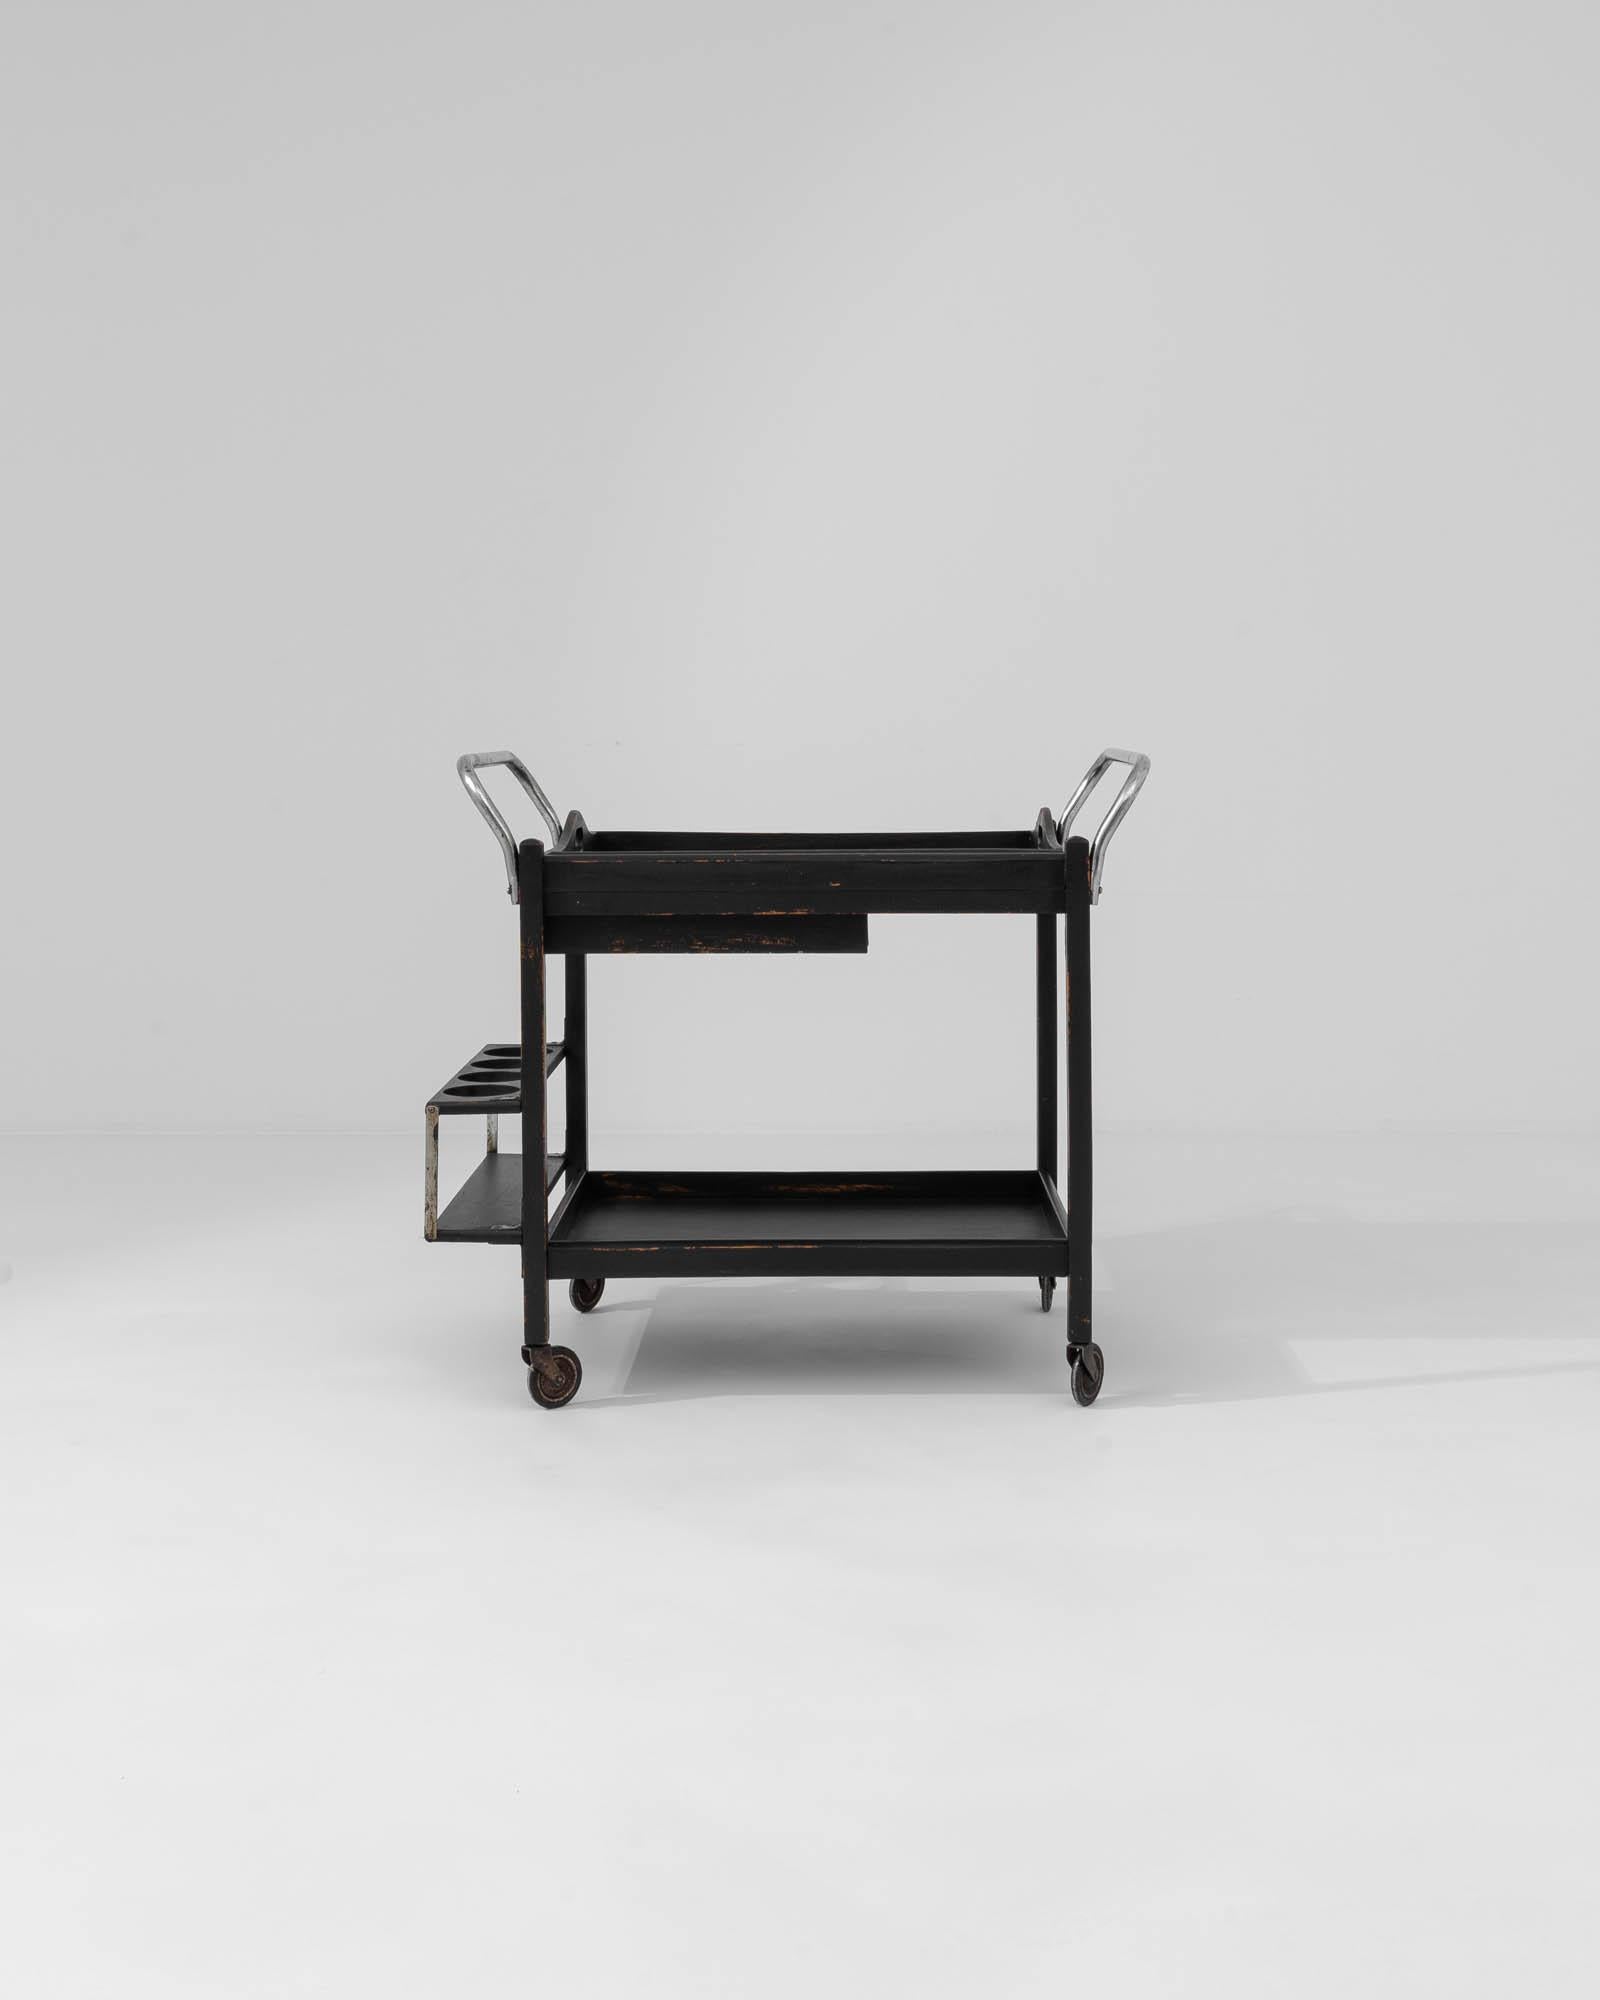 Step back in time with this 20th-century wood black patinated bar cart on wheels, an authentic piece of history designed to elevate your home entertainment experience. Crafted with care, its sturdy wooden frame is enhanced by a rich black patina